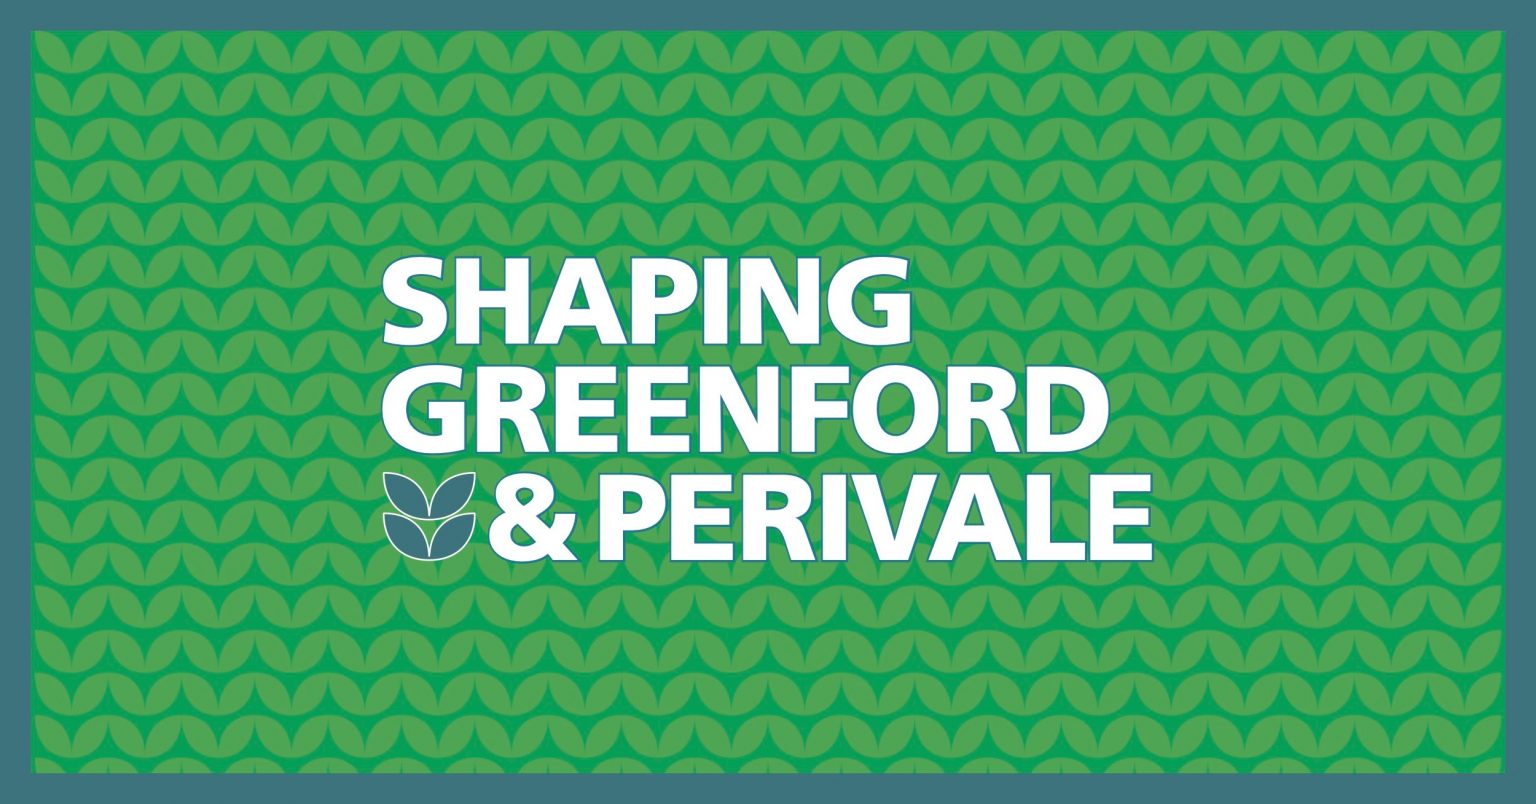 Green poster saying shaping greenford and perivale